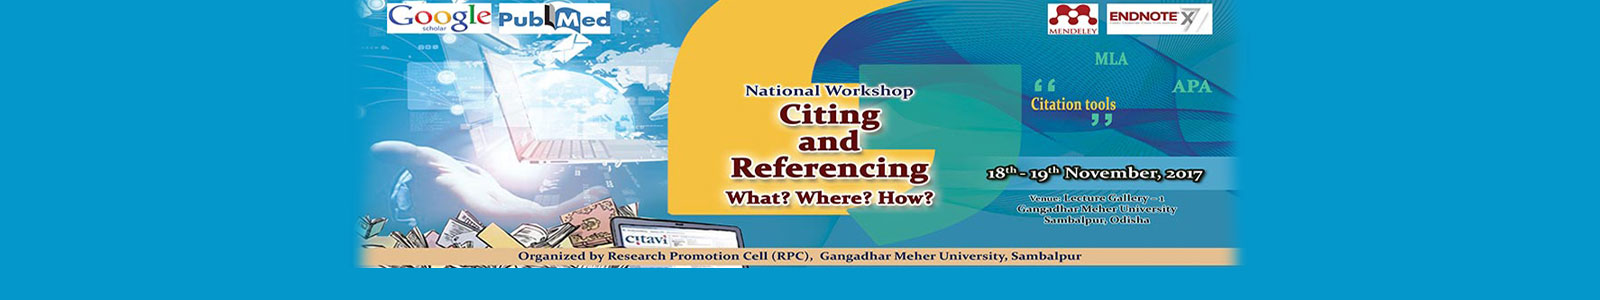 National Workshop on Citing and Referencing